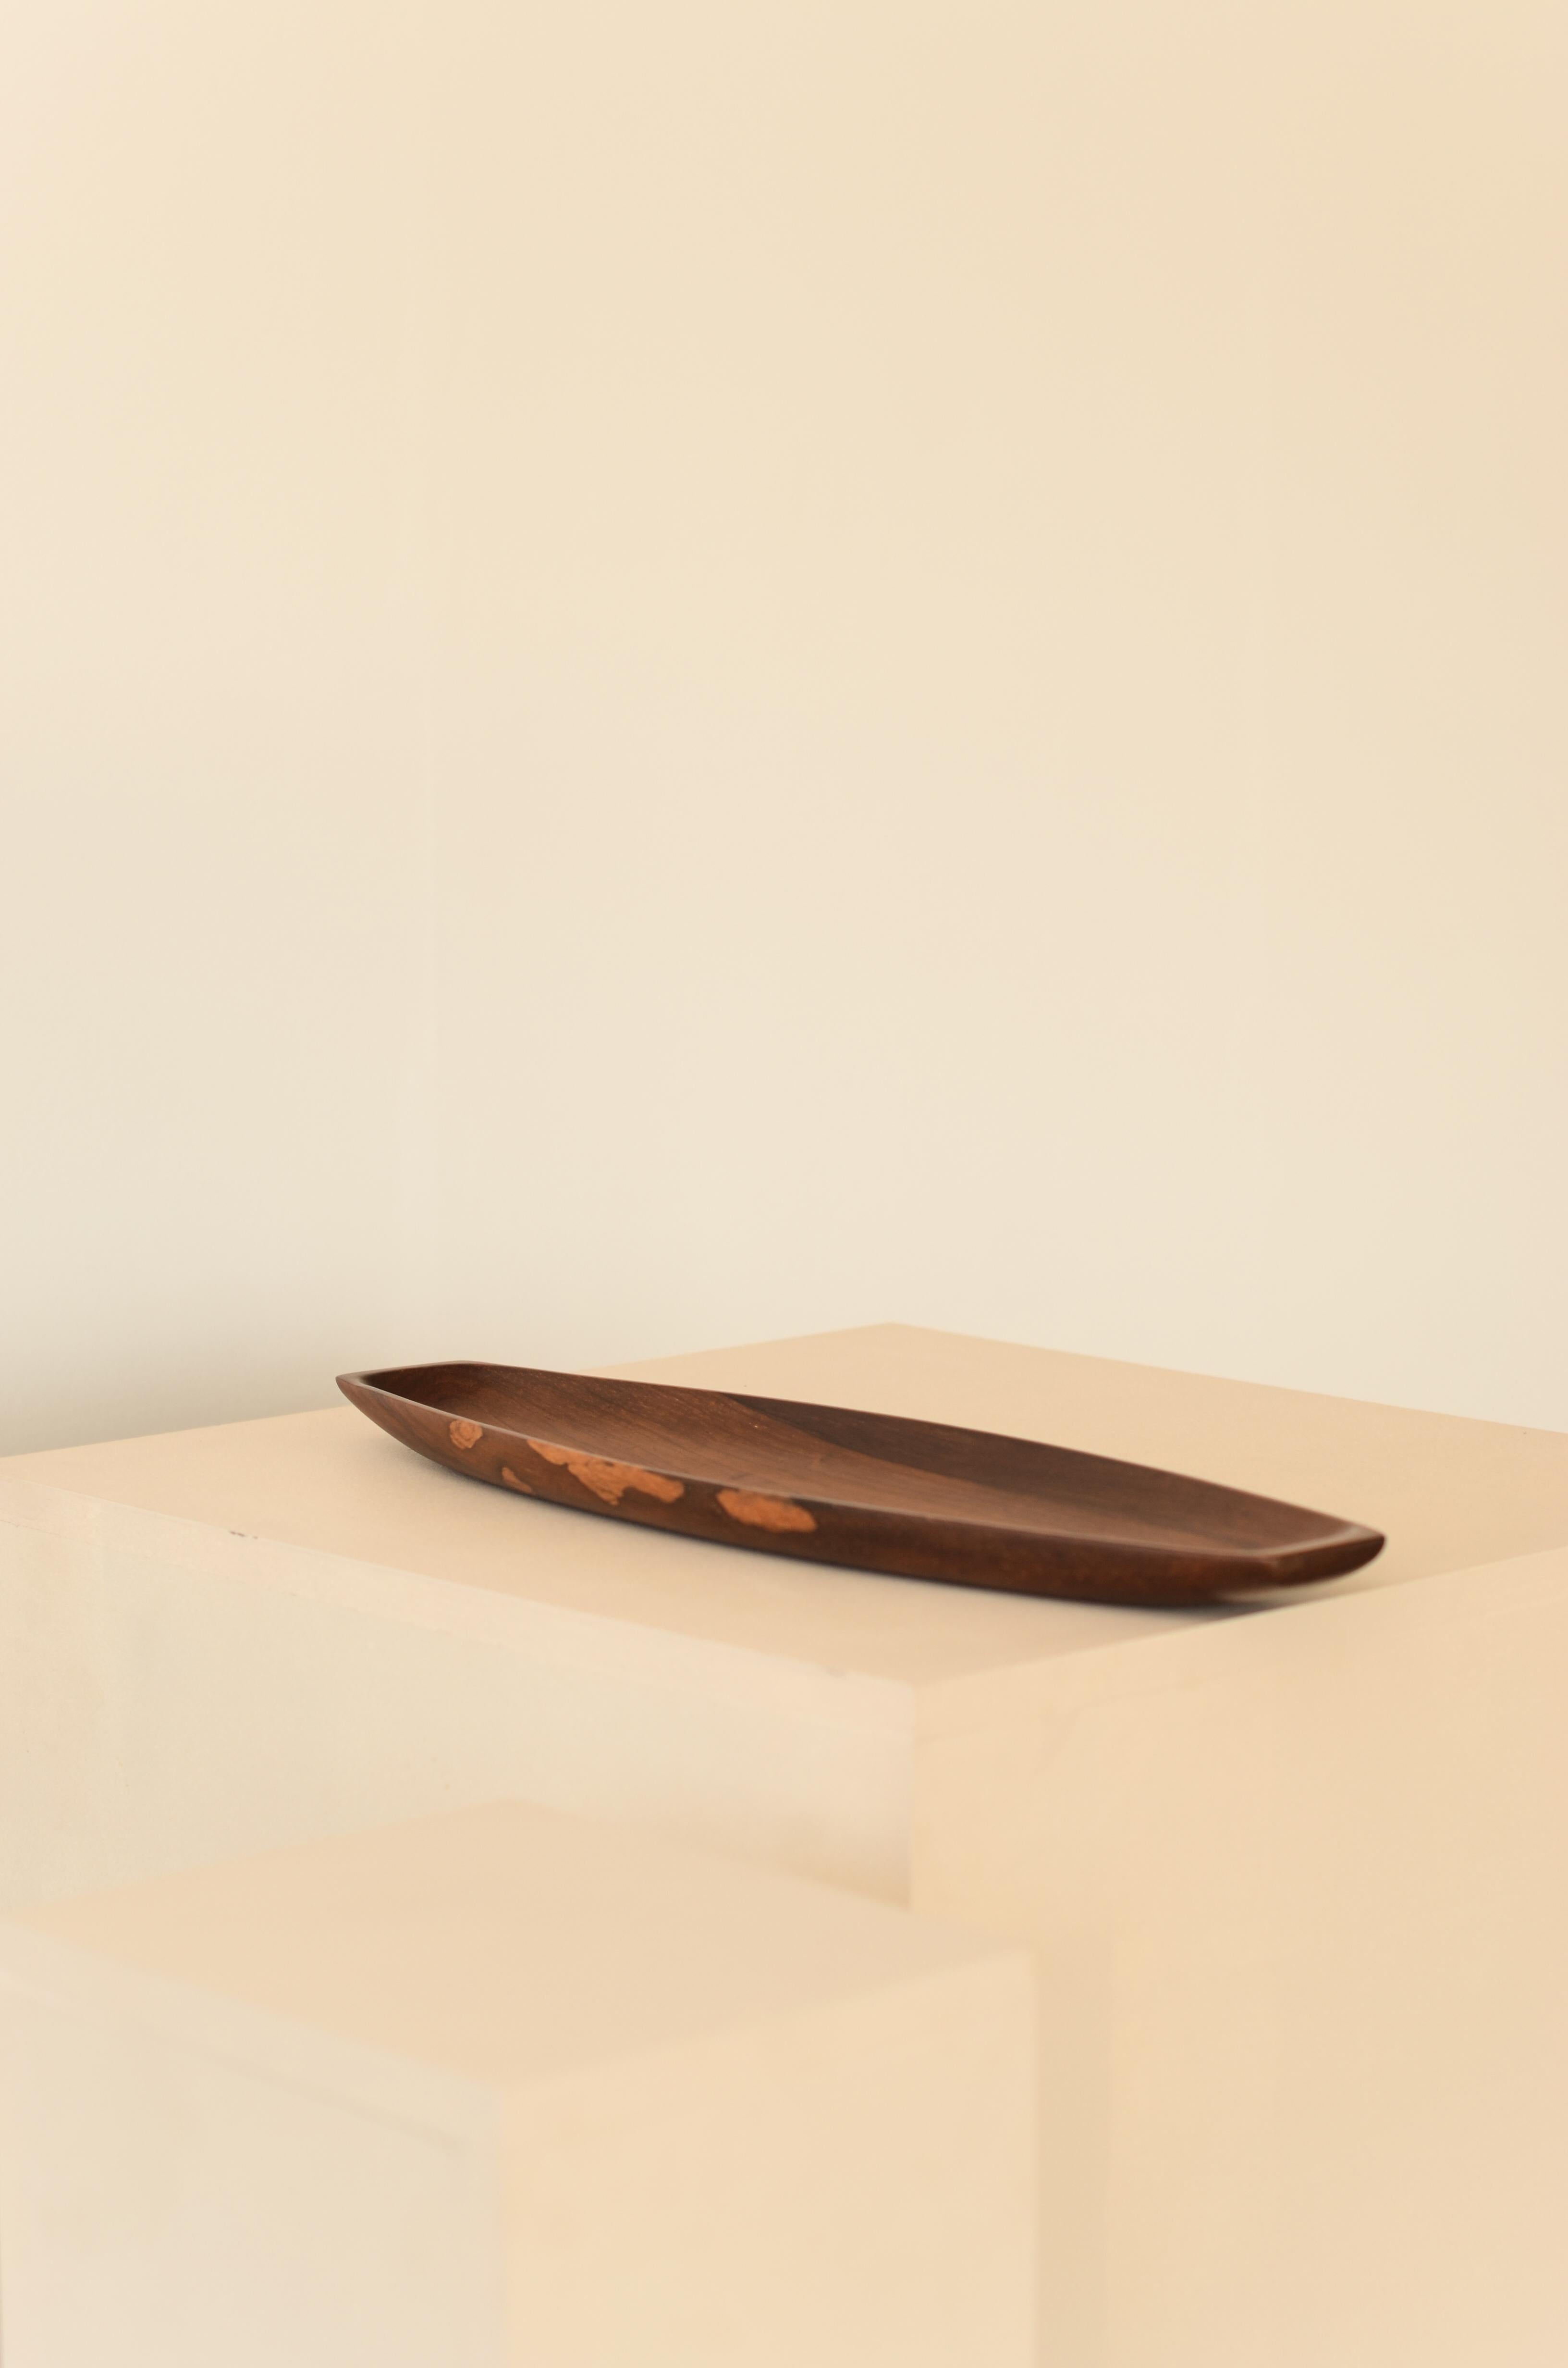 Solid rosewood platter by Jean Gillon model 705 from the WoodArt catalogue.

Jean Gillon (1919-2007) was born in Romania, where he graduated in Architecture and Fine Arts. In 1956 he moved to Brazil, where he developed an impressive and vast work as